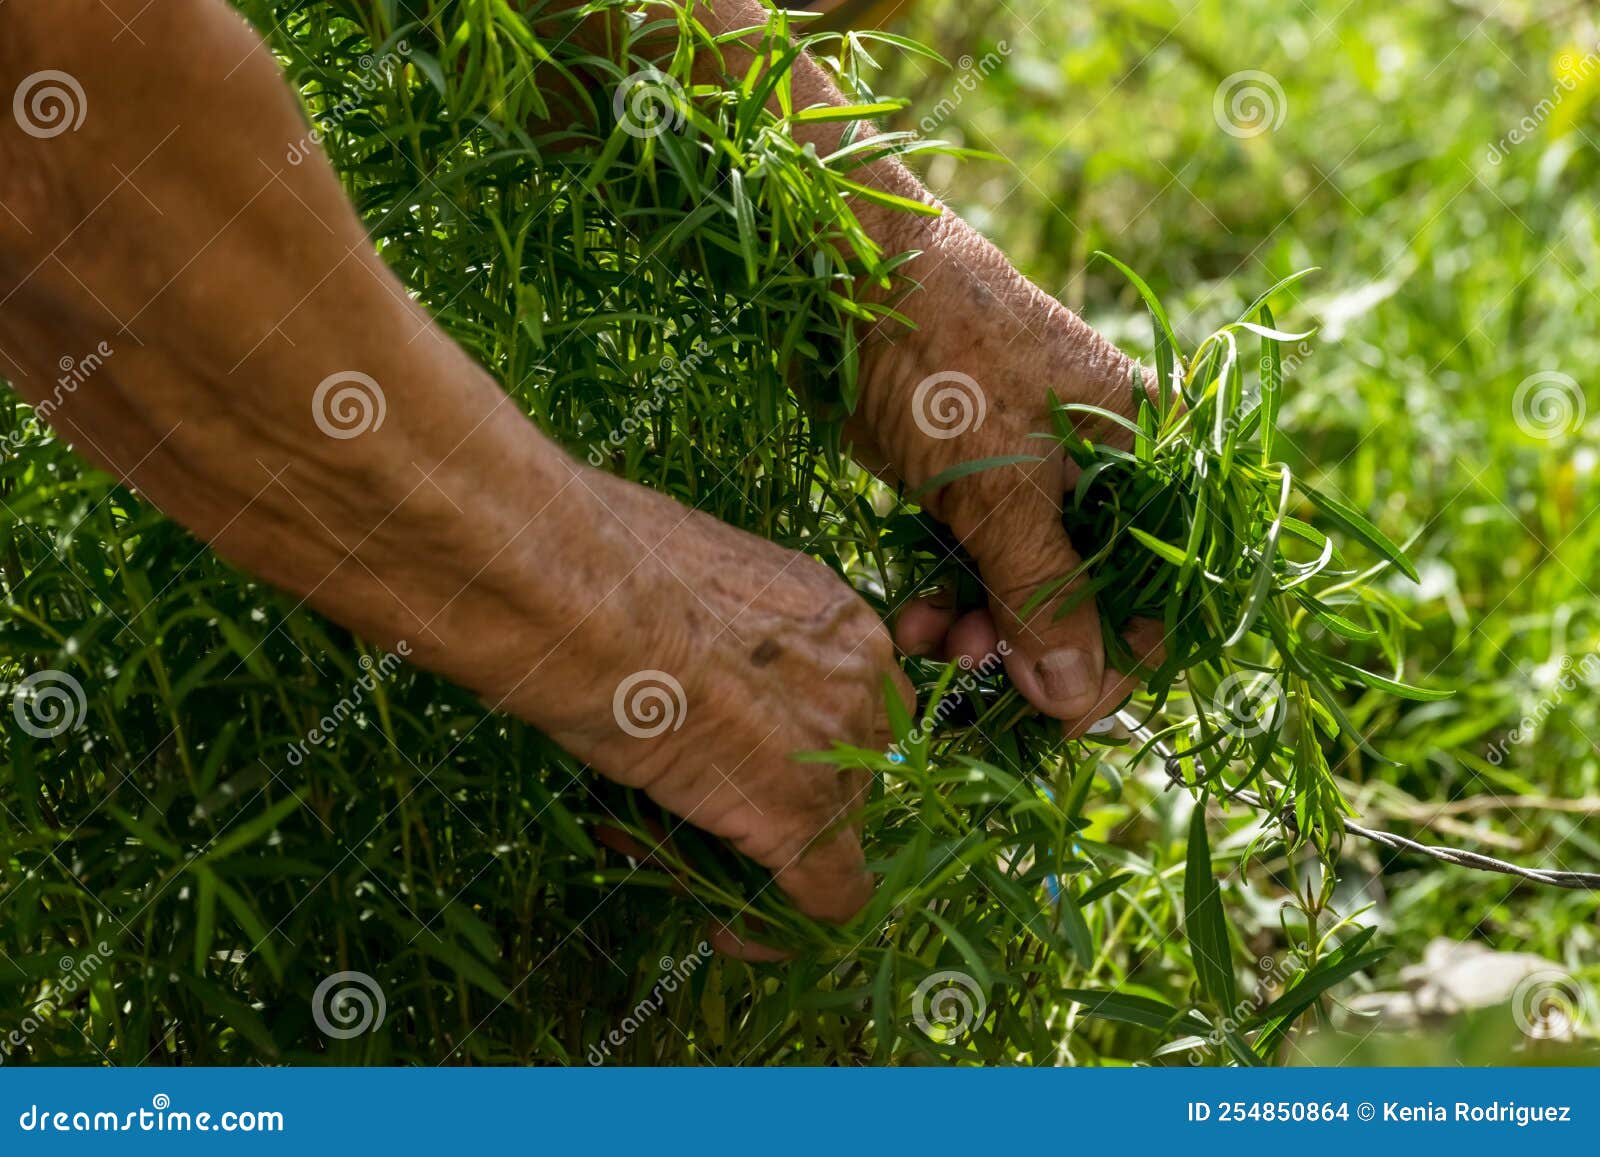 female elderly hands picking up medicinal plants in a tropical garden